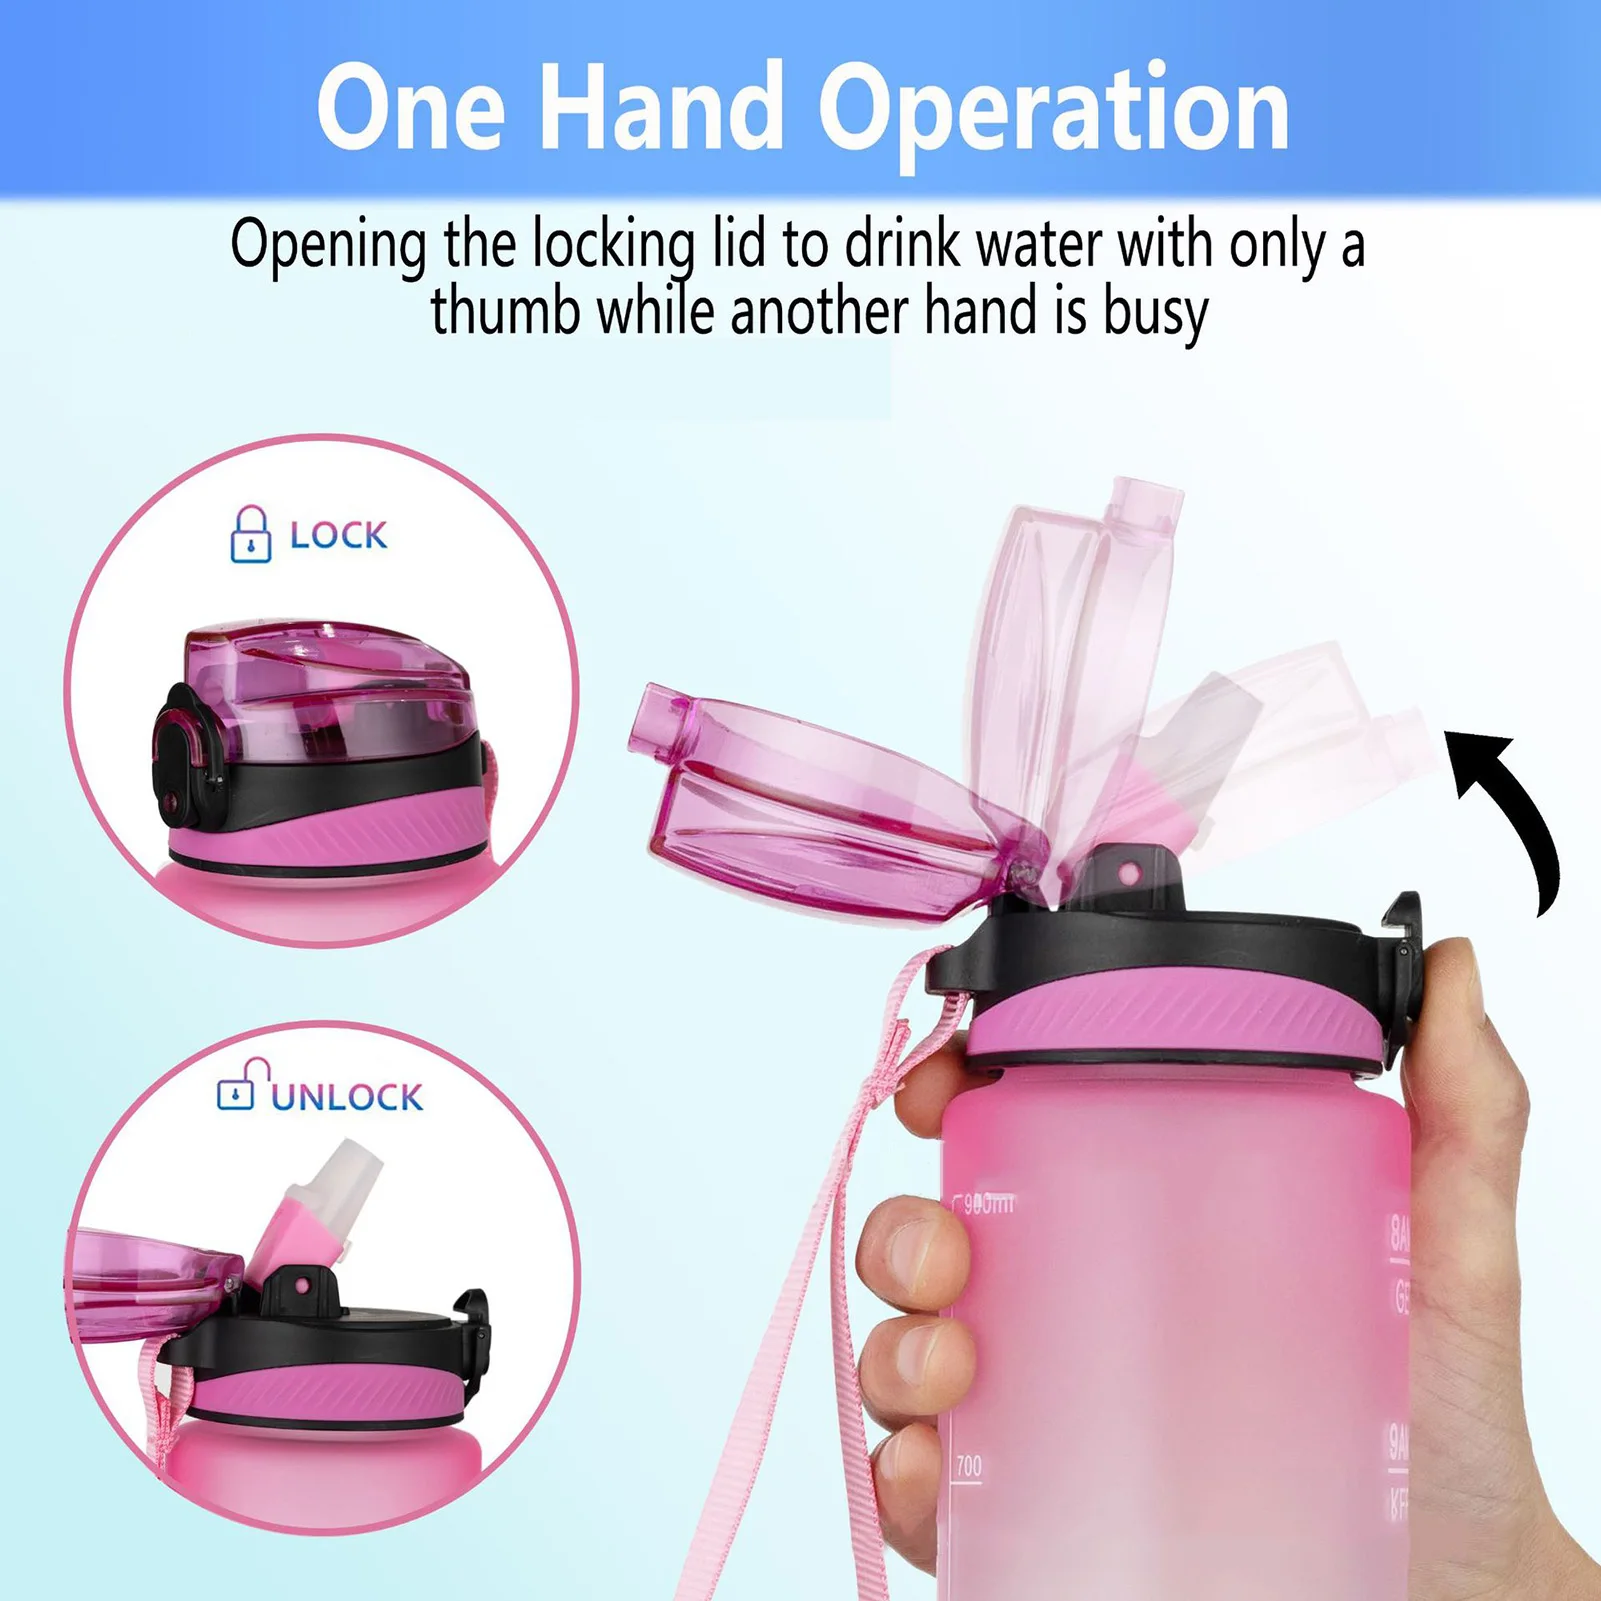 Motivational Water Bottle BPA Free 1L Jug with Straw and Time